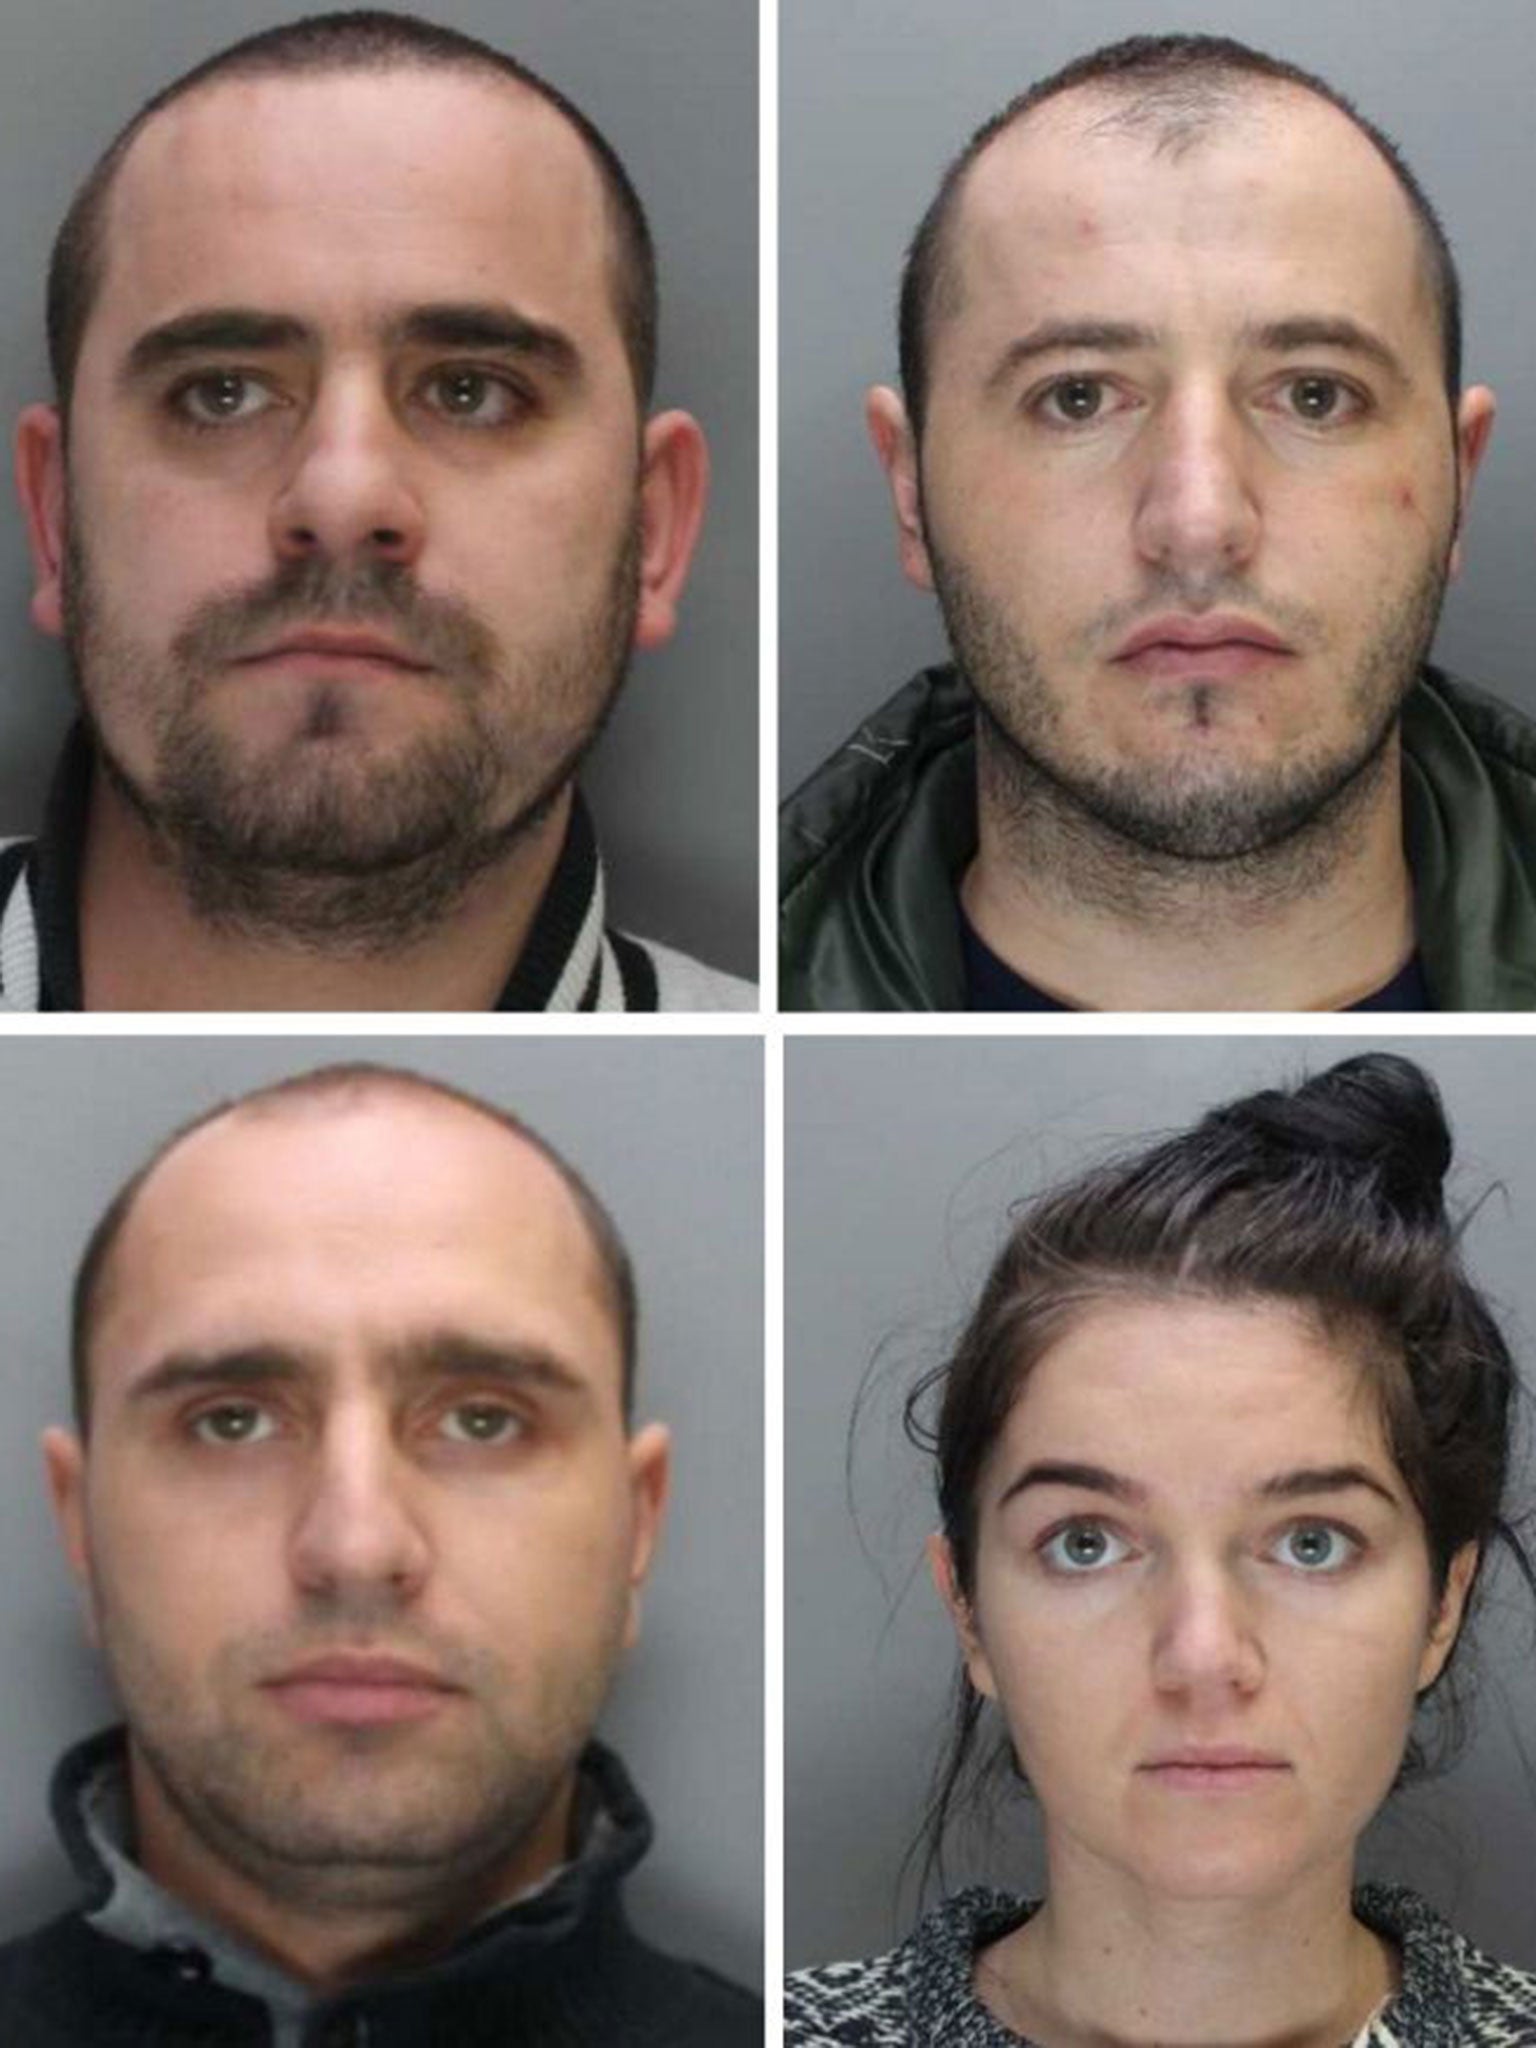 Florin Ioan Silaghi, Vasile Daniel Pop, Adriana Alexandra Turc and Ovidiu Florin Metac, were all part of the gang of Romanian fraudsters who stole an estimated £16 million-worth of bank card details from more than 60,000 people in the UK and abroad